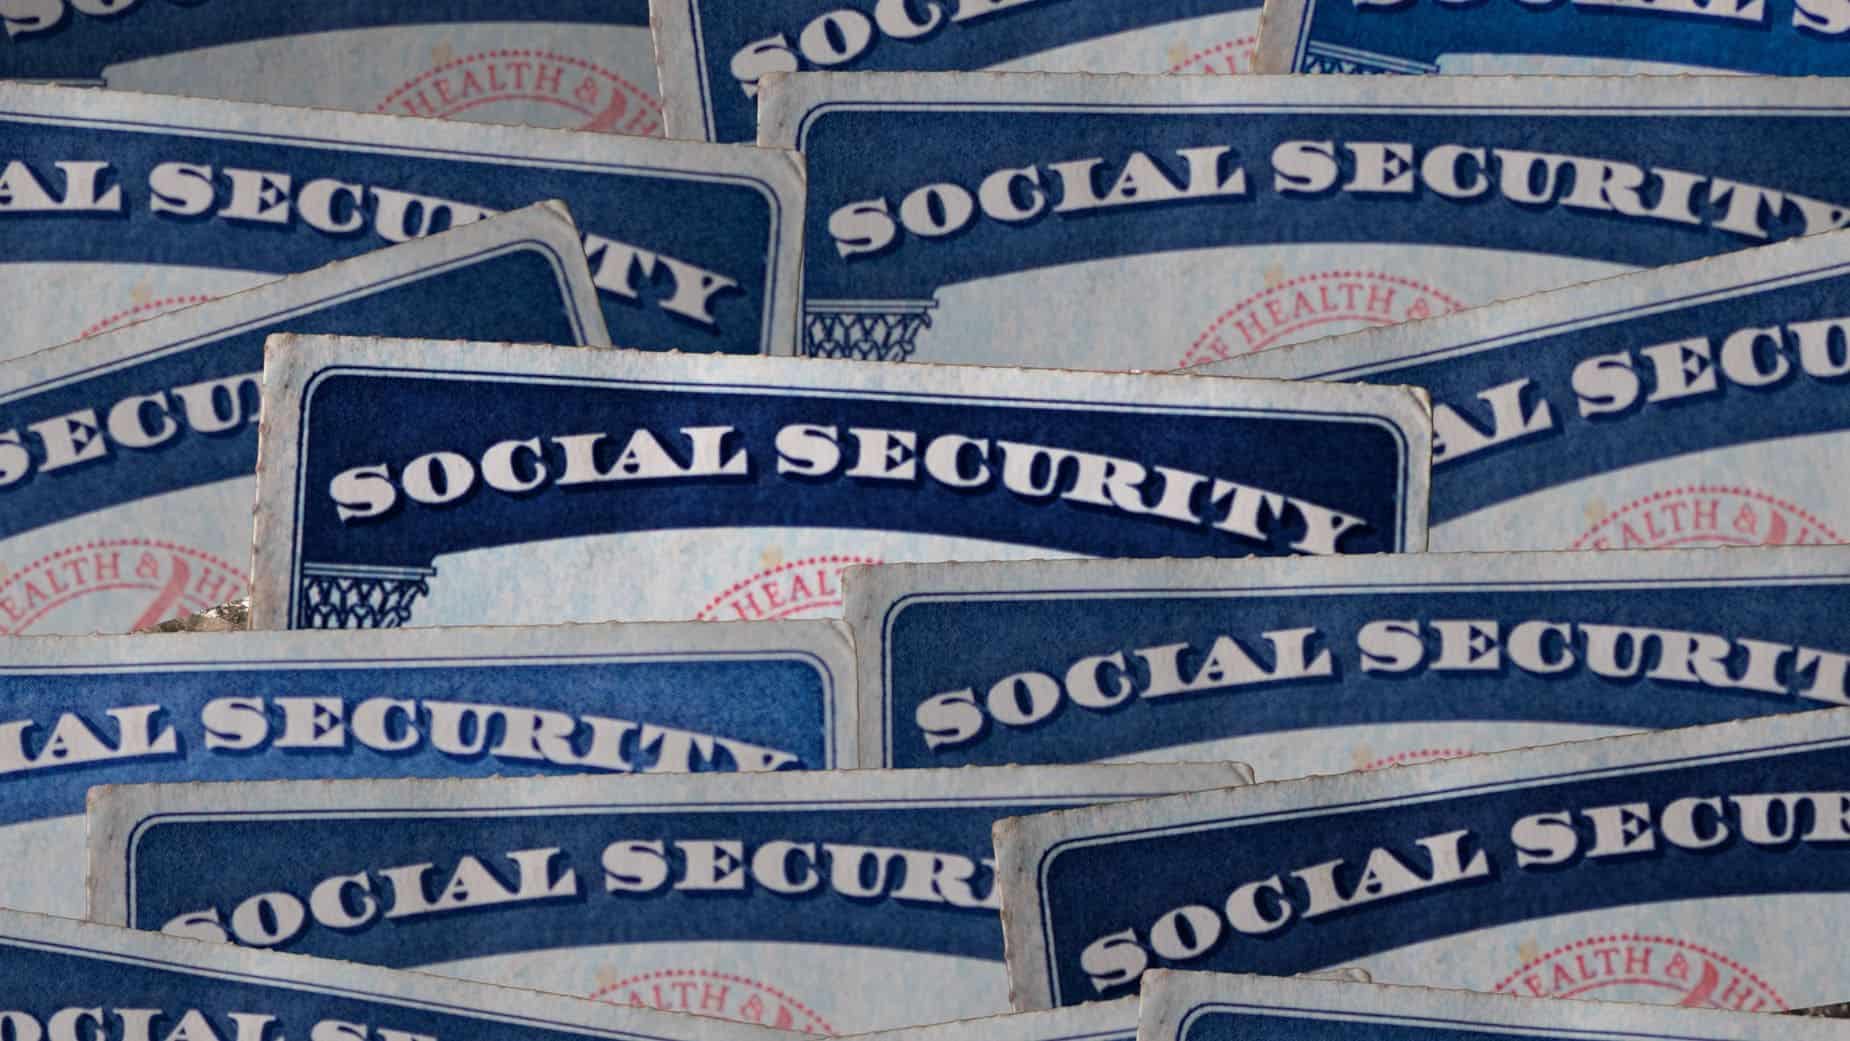 You can get a new Social Security payment in February 21 if you meet the requirements